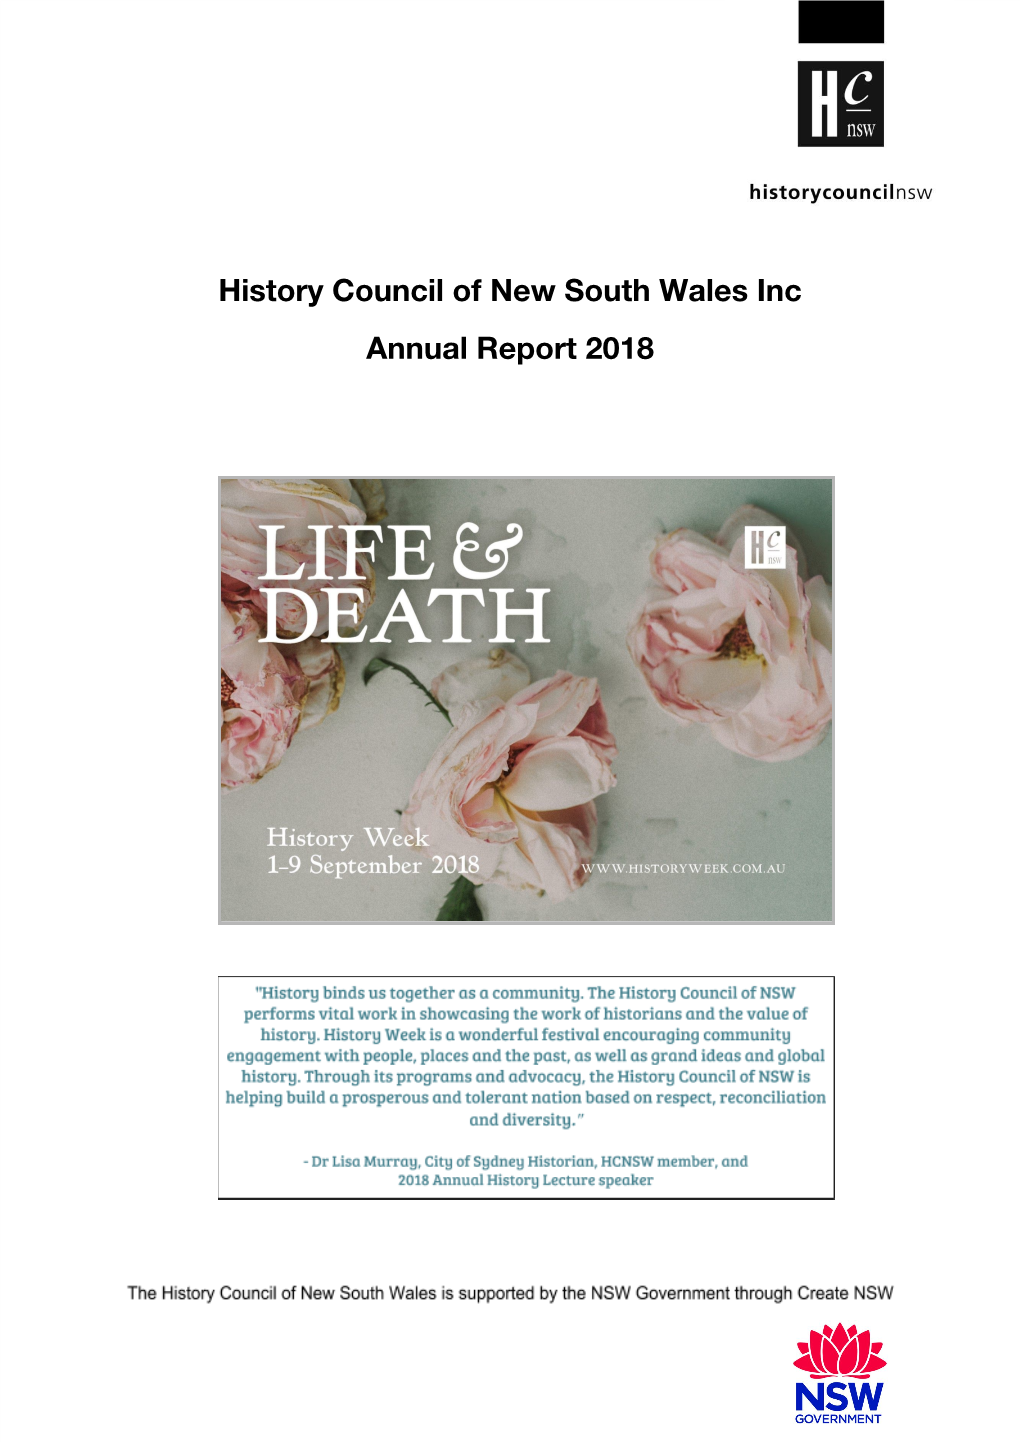 History Council of New South Wales Inc Annual Report 2018